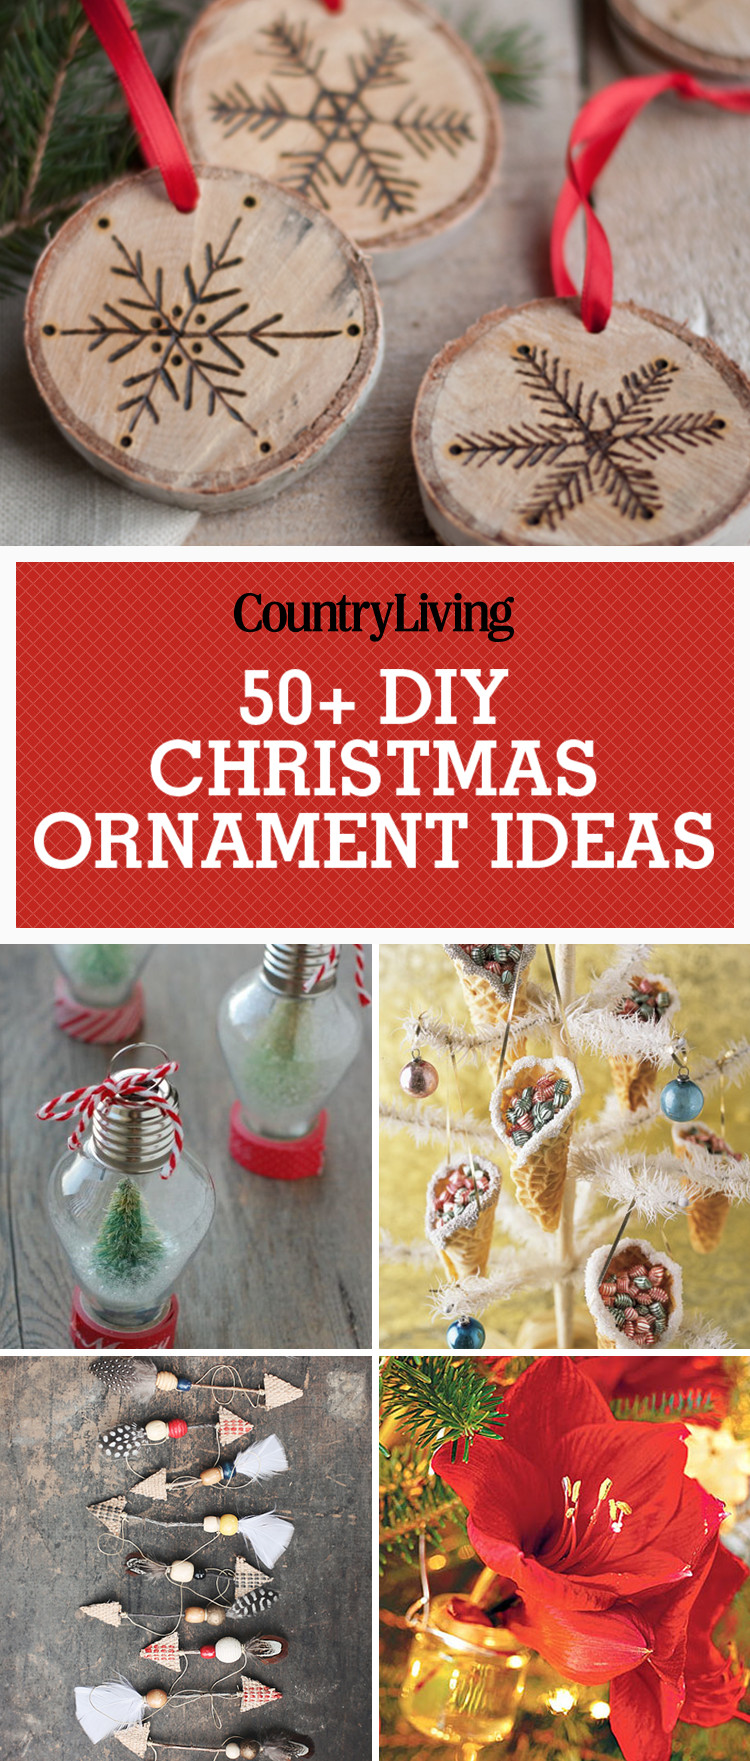 Easy DIY Christmas Ornaments
 55 Homemade Christmas Ornaments DIY Crafts with